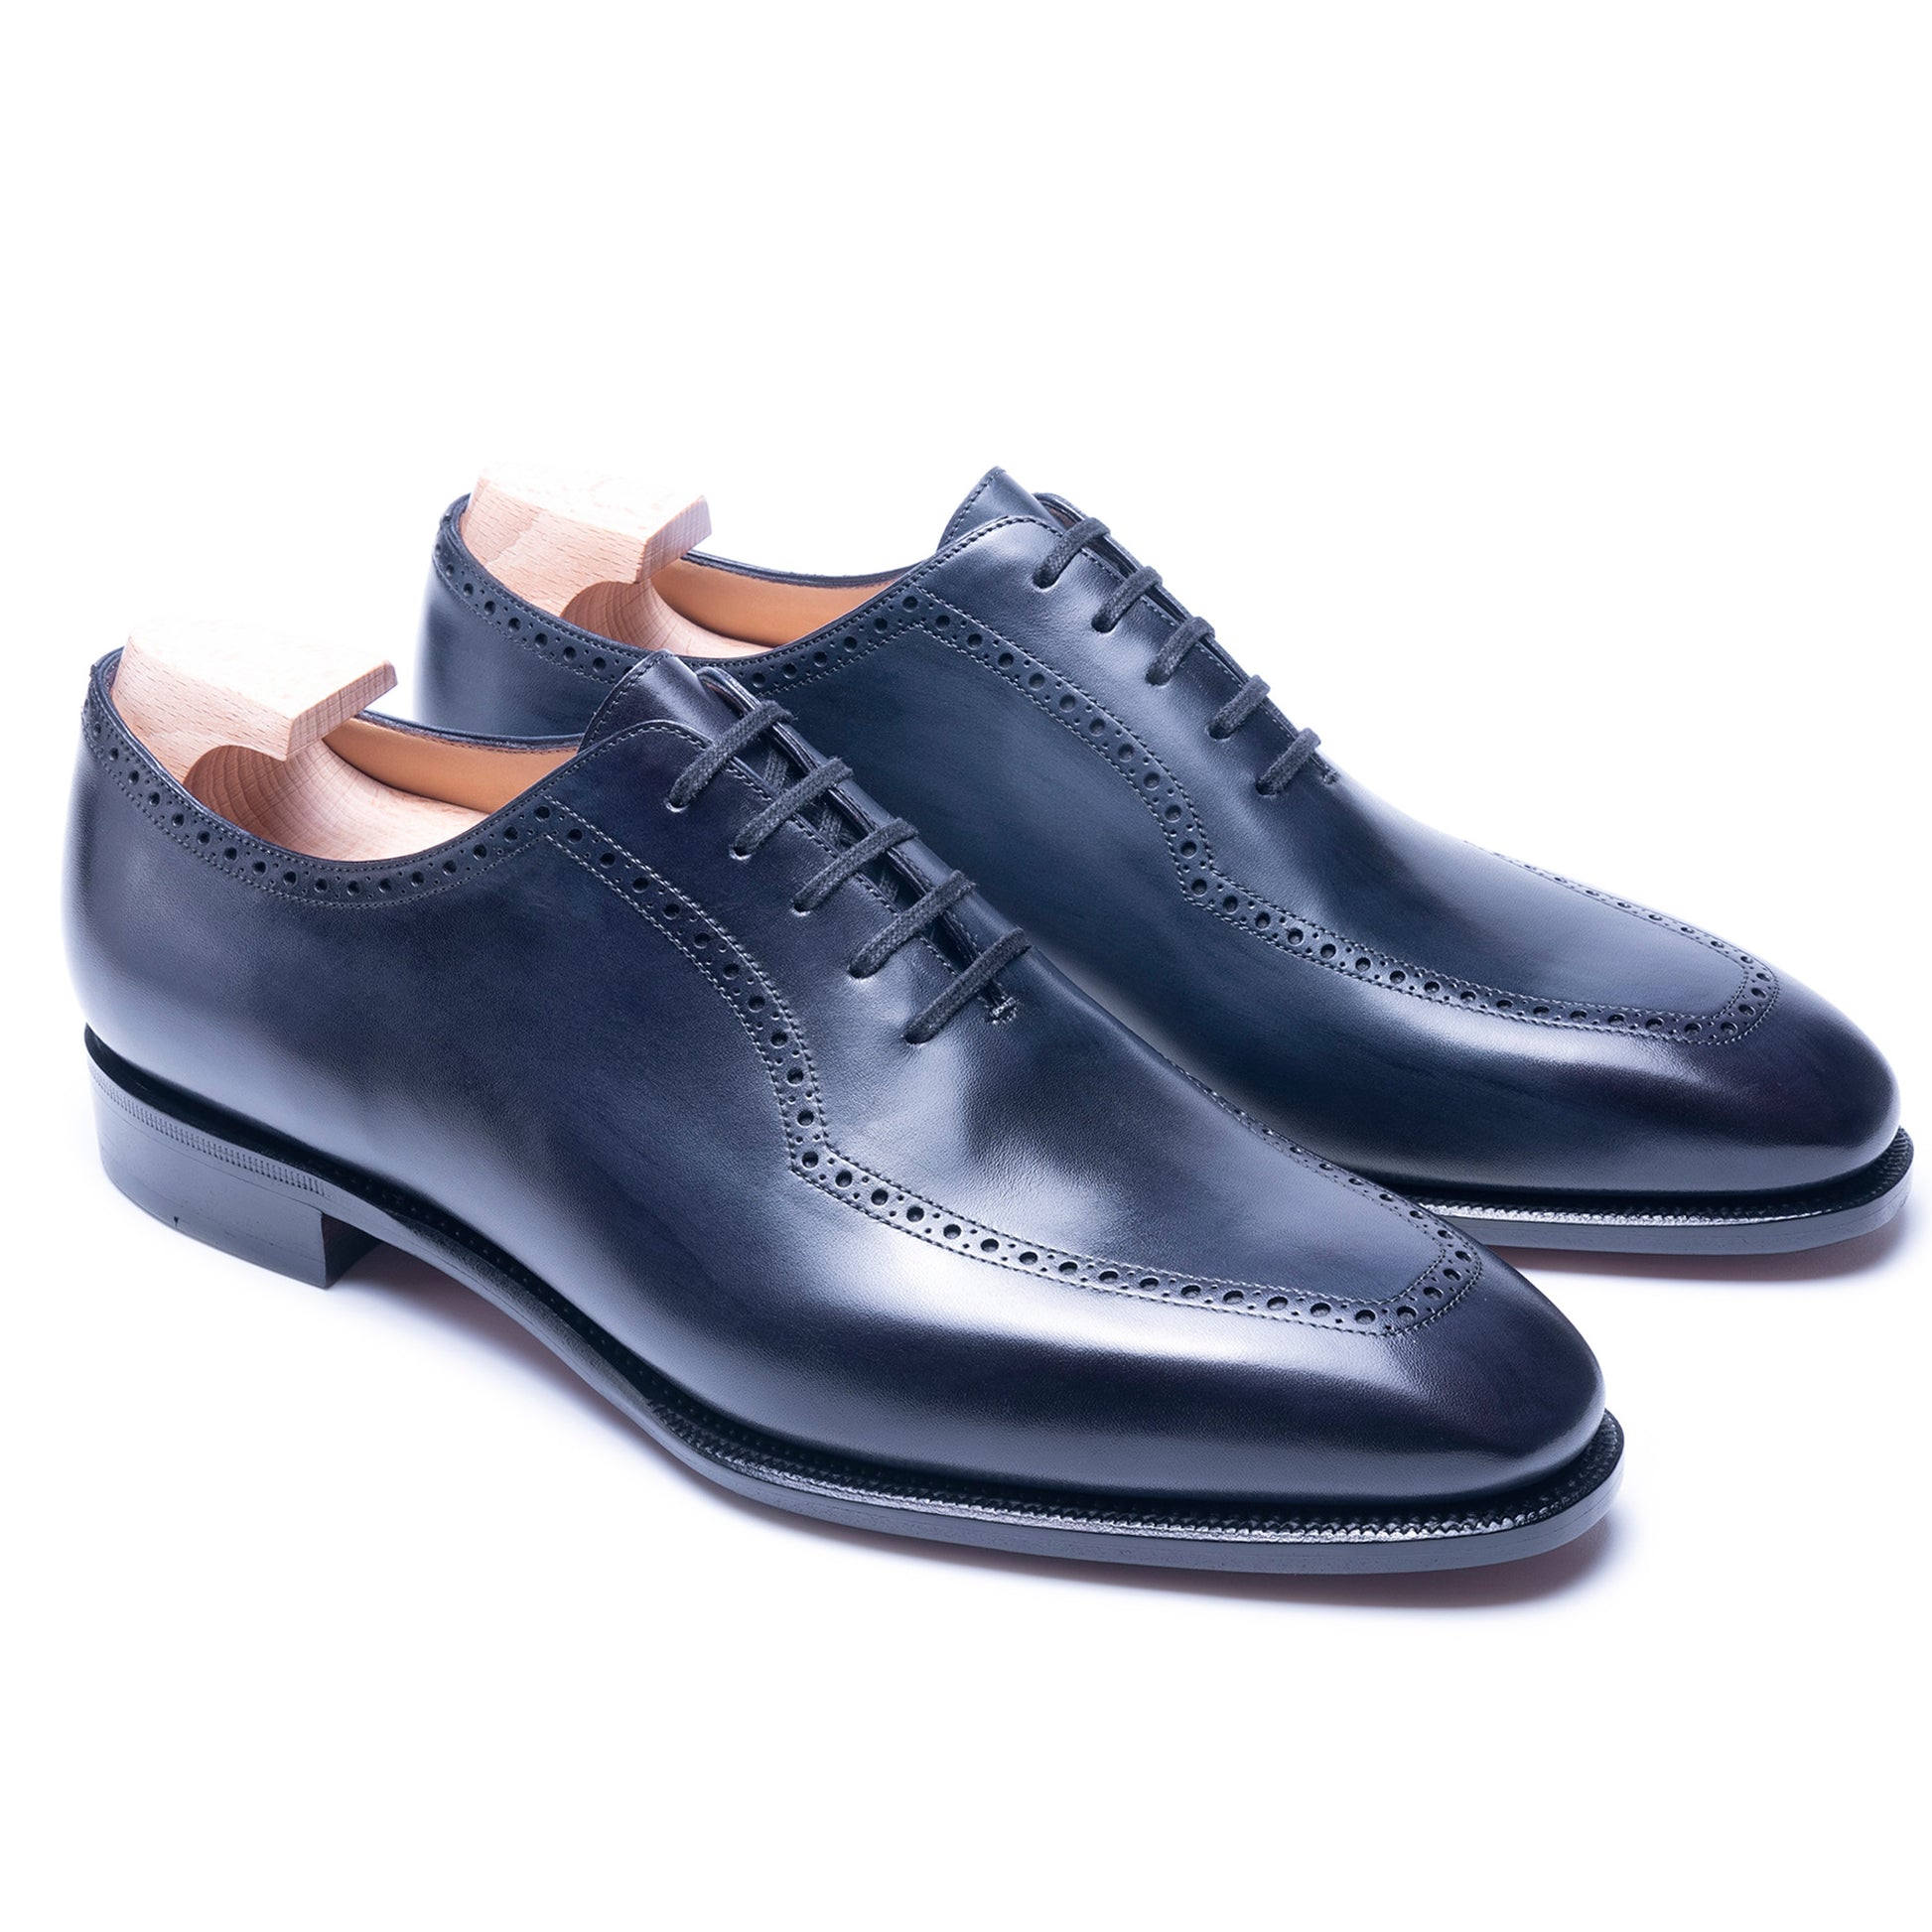 TLB Mallorca leather shoes 254 / PICASSO / VEGANO NAVY